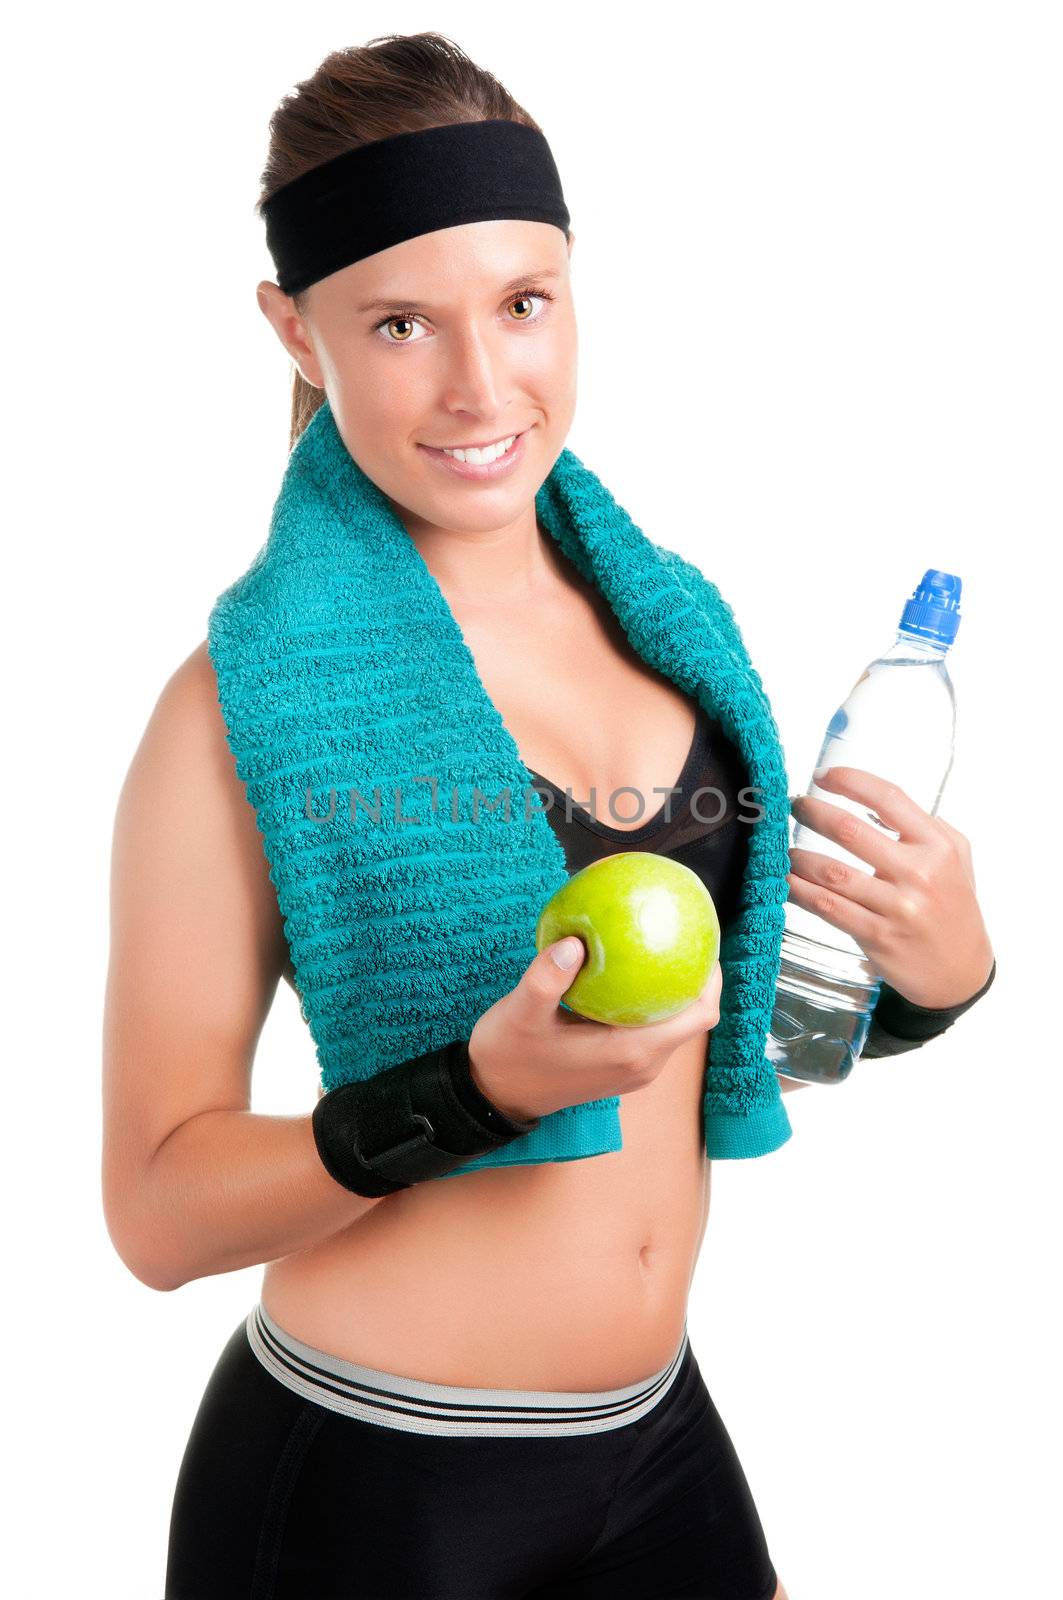 Woman holding an apple and a bottle of water after a workout in the gym, isolated in a white background